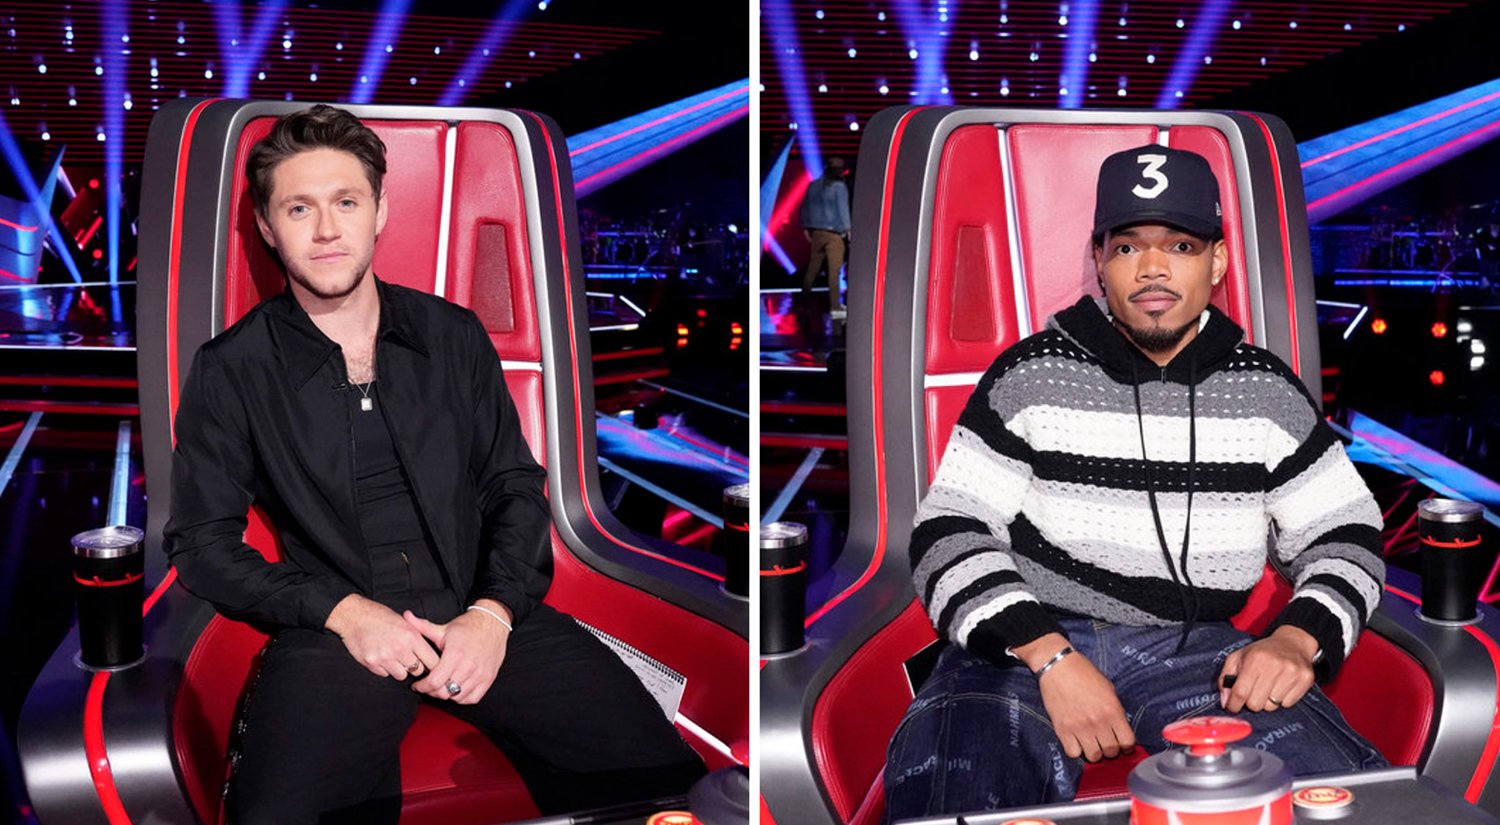 Niall Horan vs. Chance the Rapper: Which ‘The Voice’ Season 23 Coach Has a Higher Net Worth?